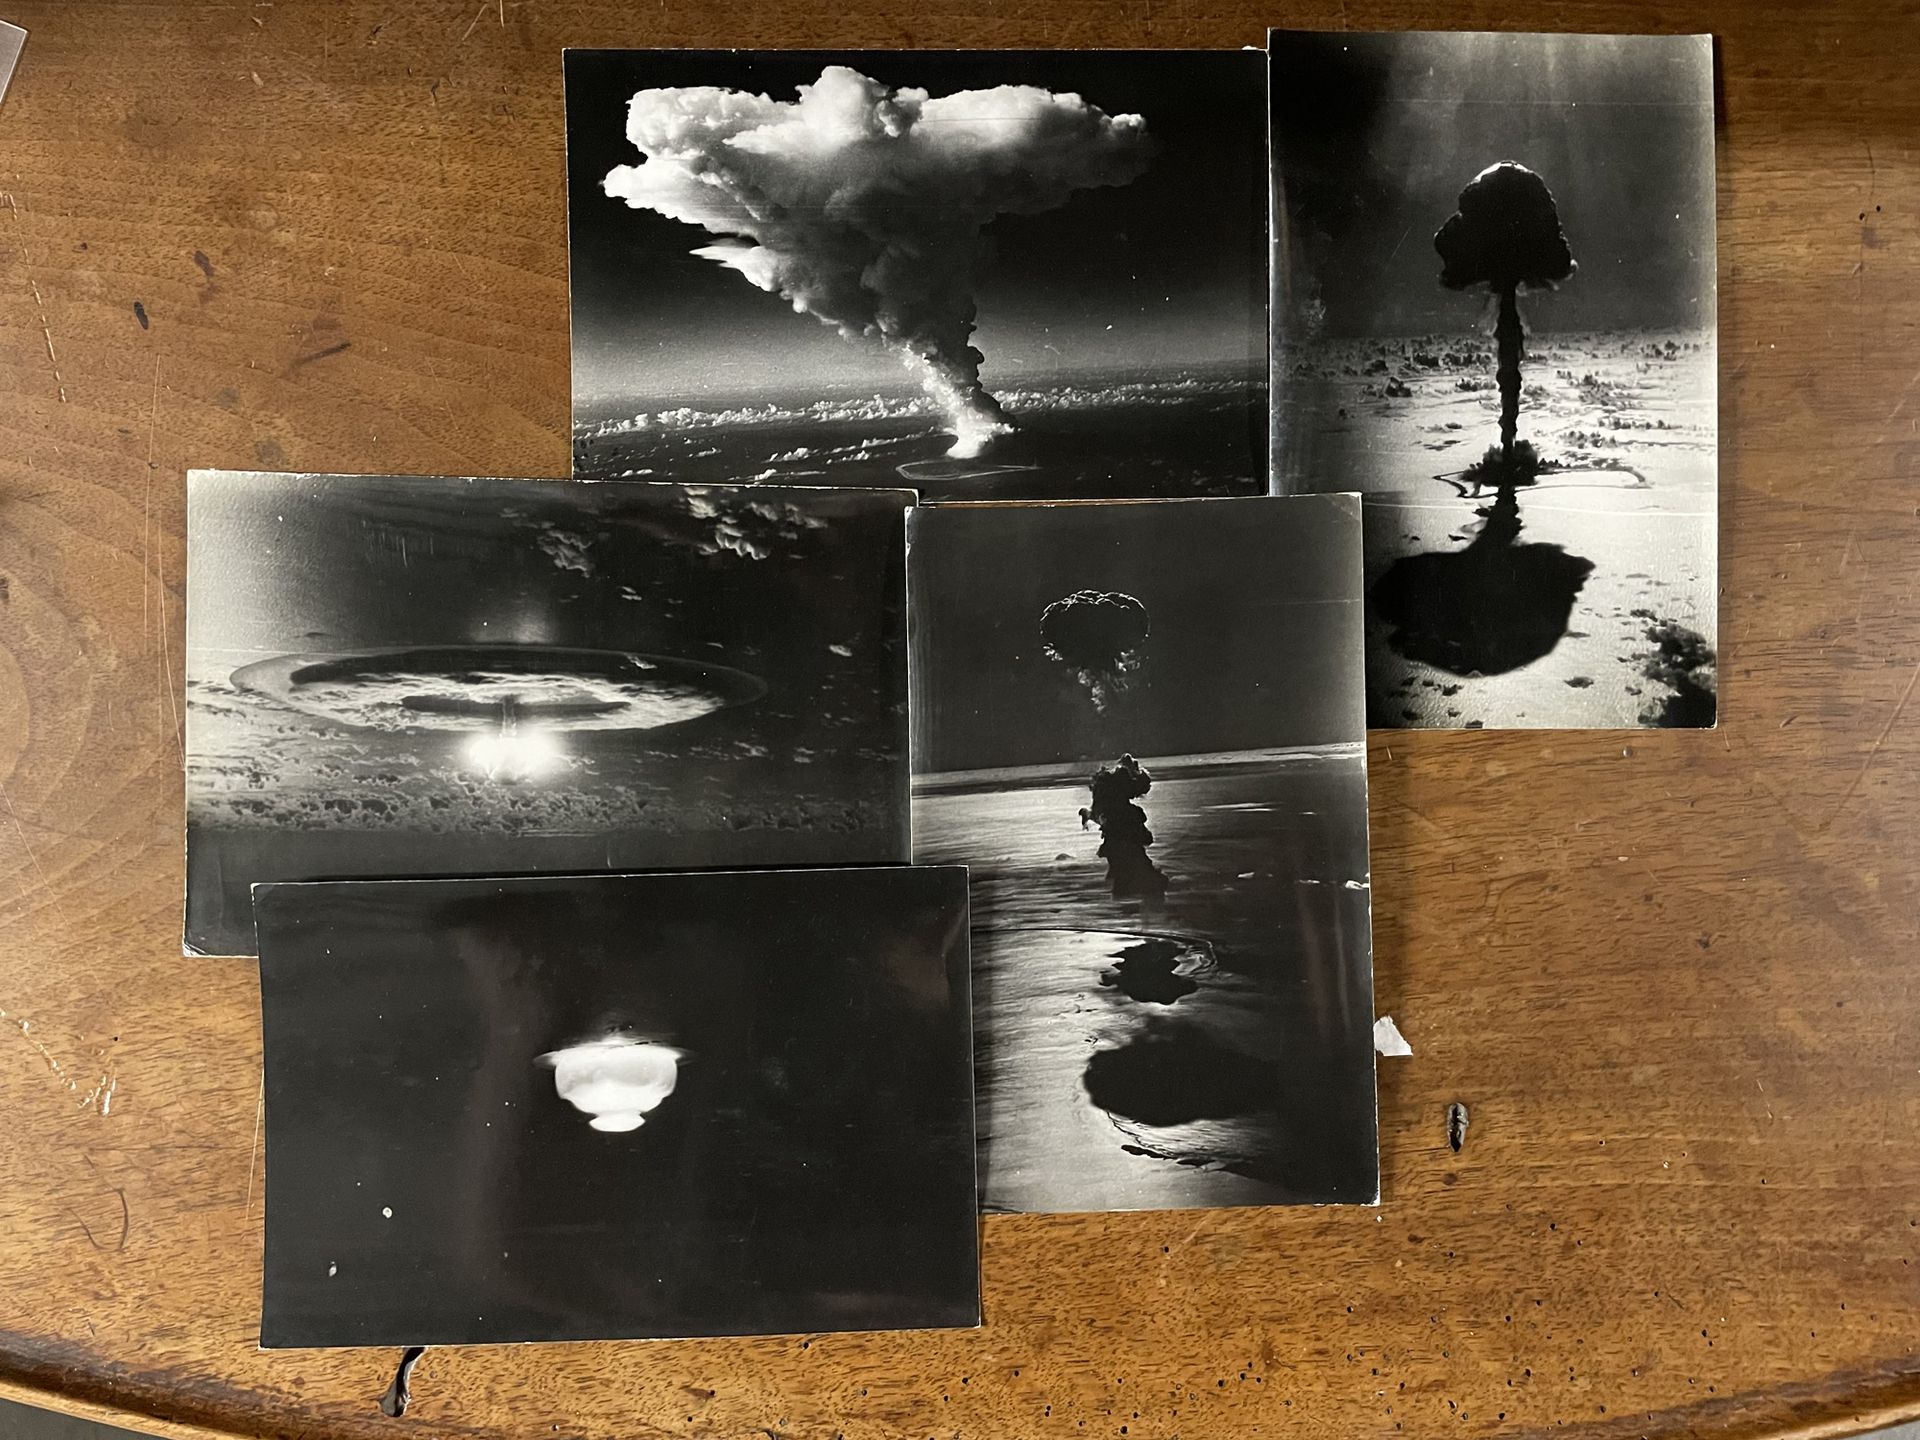 Null French Air Force photographer
French nuclear tests at Mururoa, 1968
Five vi&hellip;